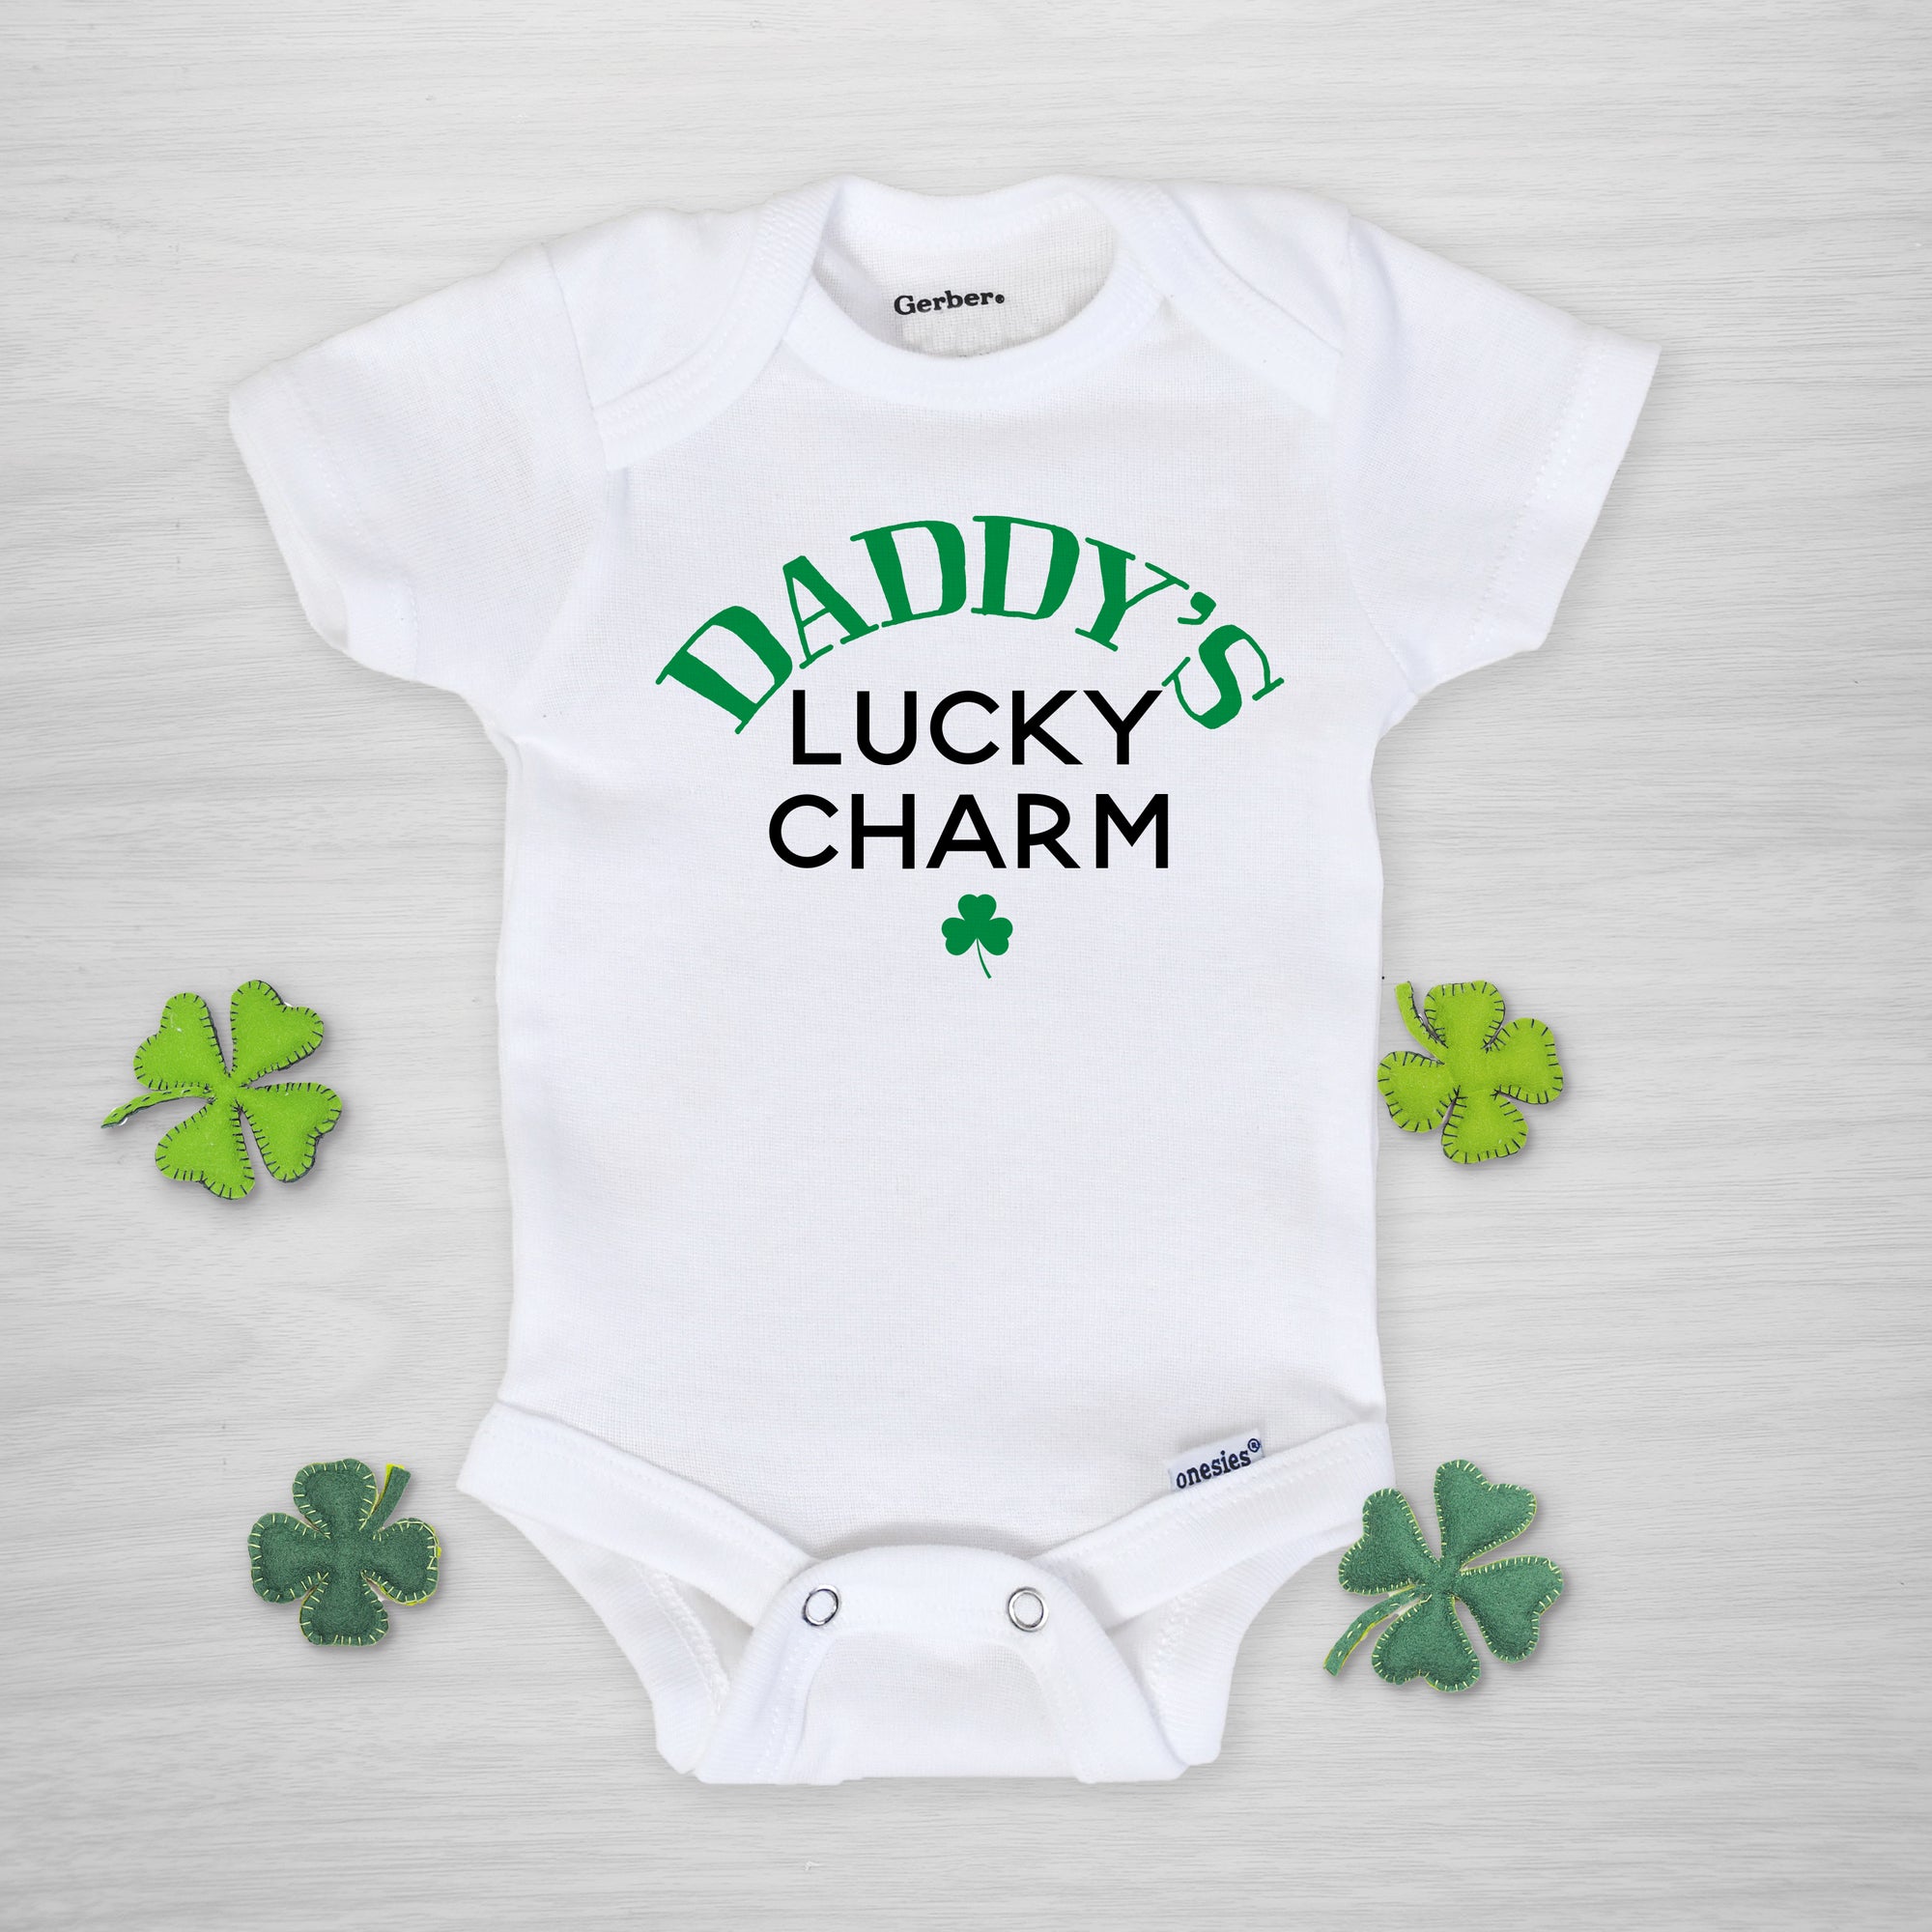 daddy's lucky charm onesie, long sleeved